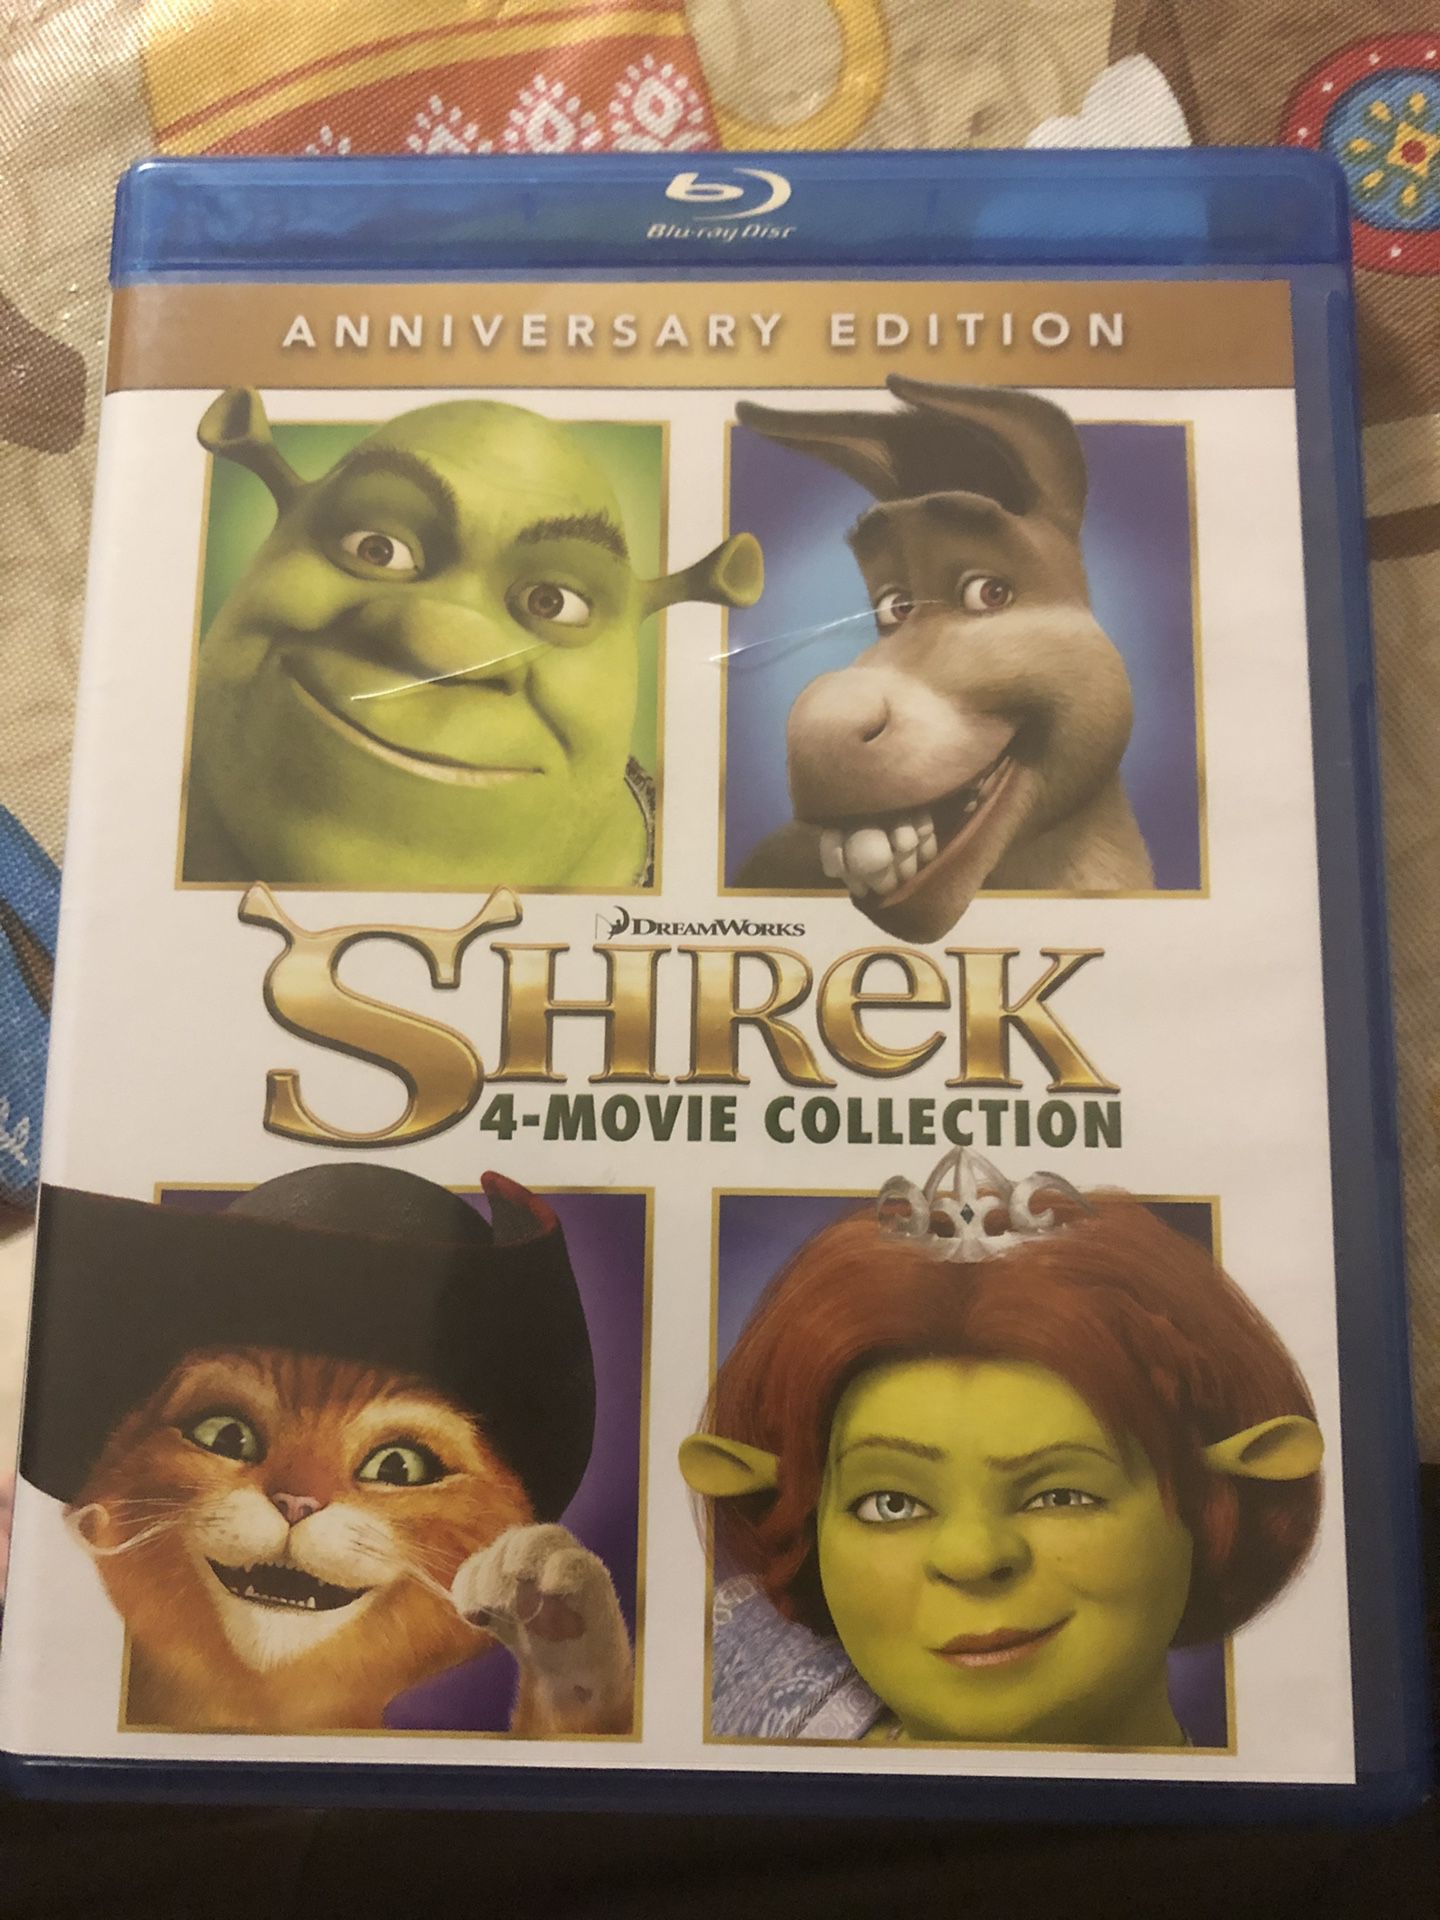 Shrek blu Ray 4 movie complete collection asking 20 firm in north Lakeland